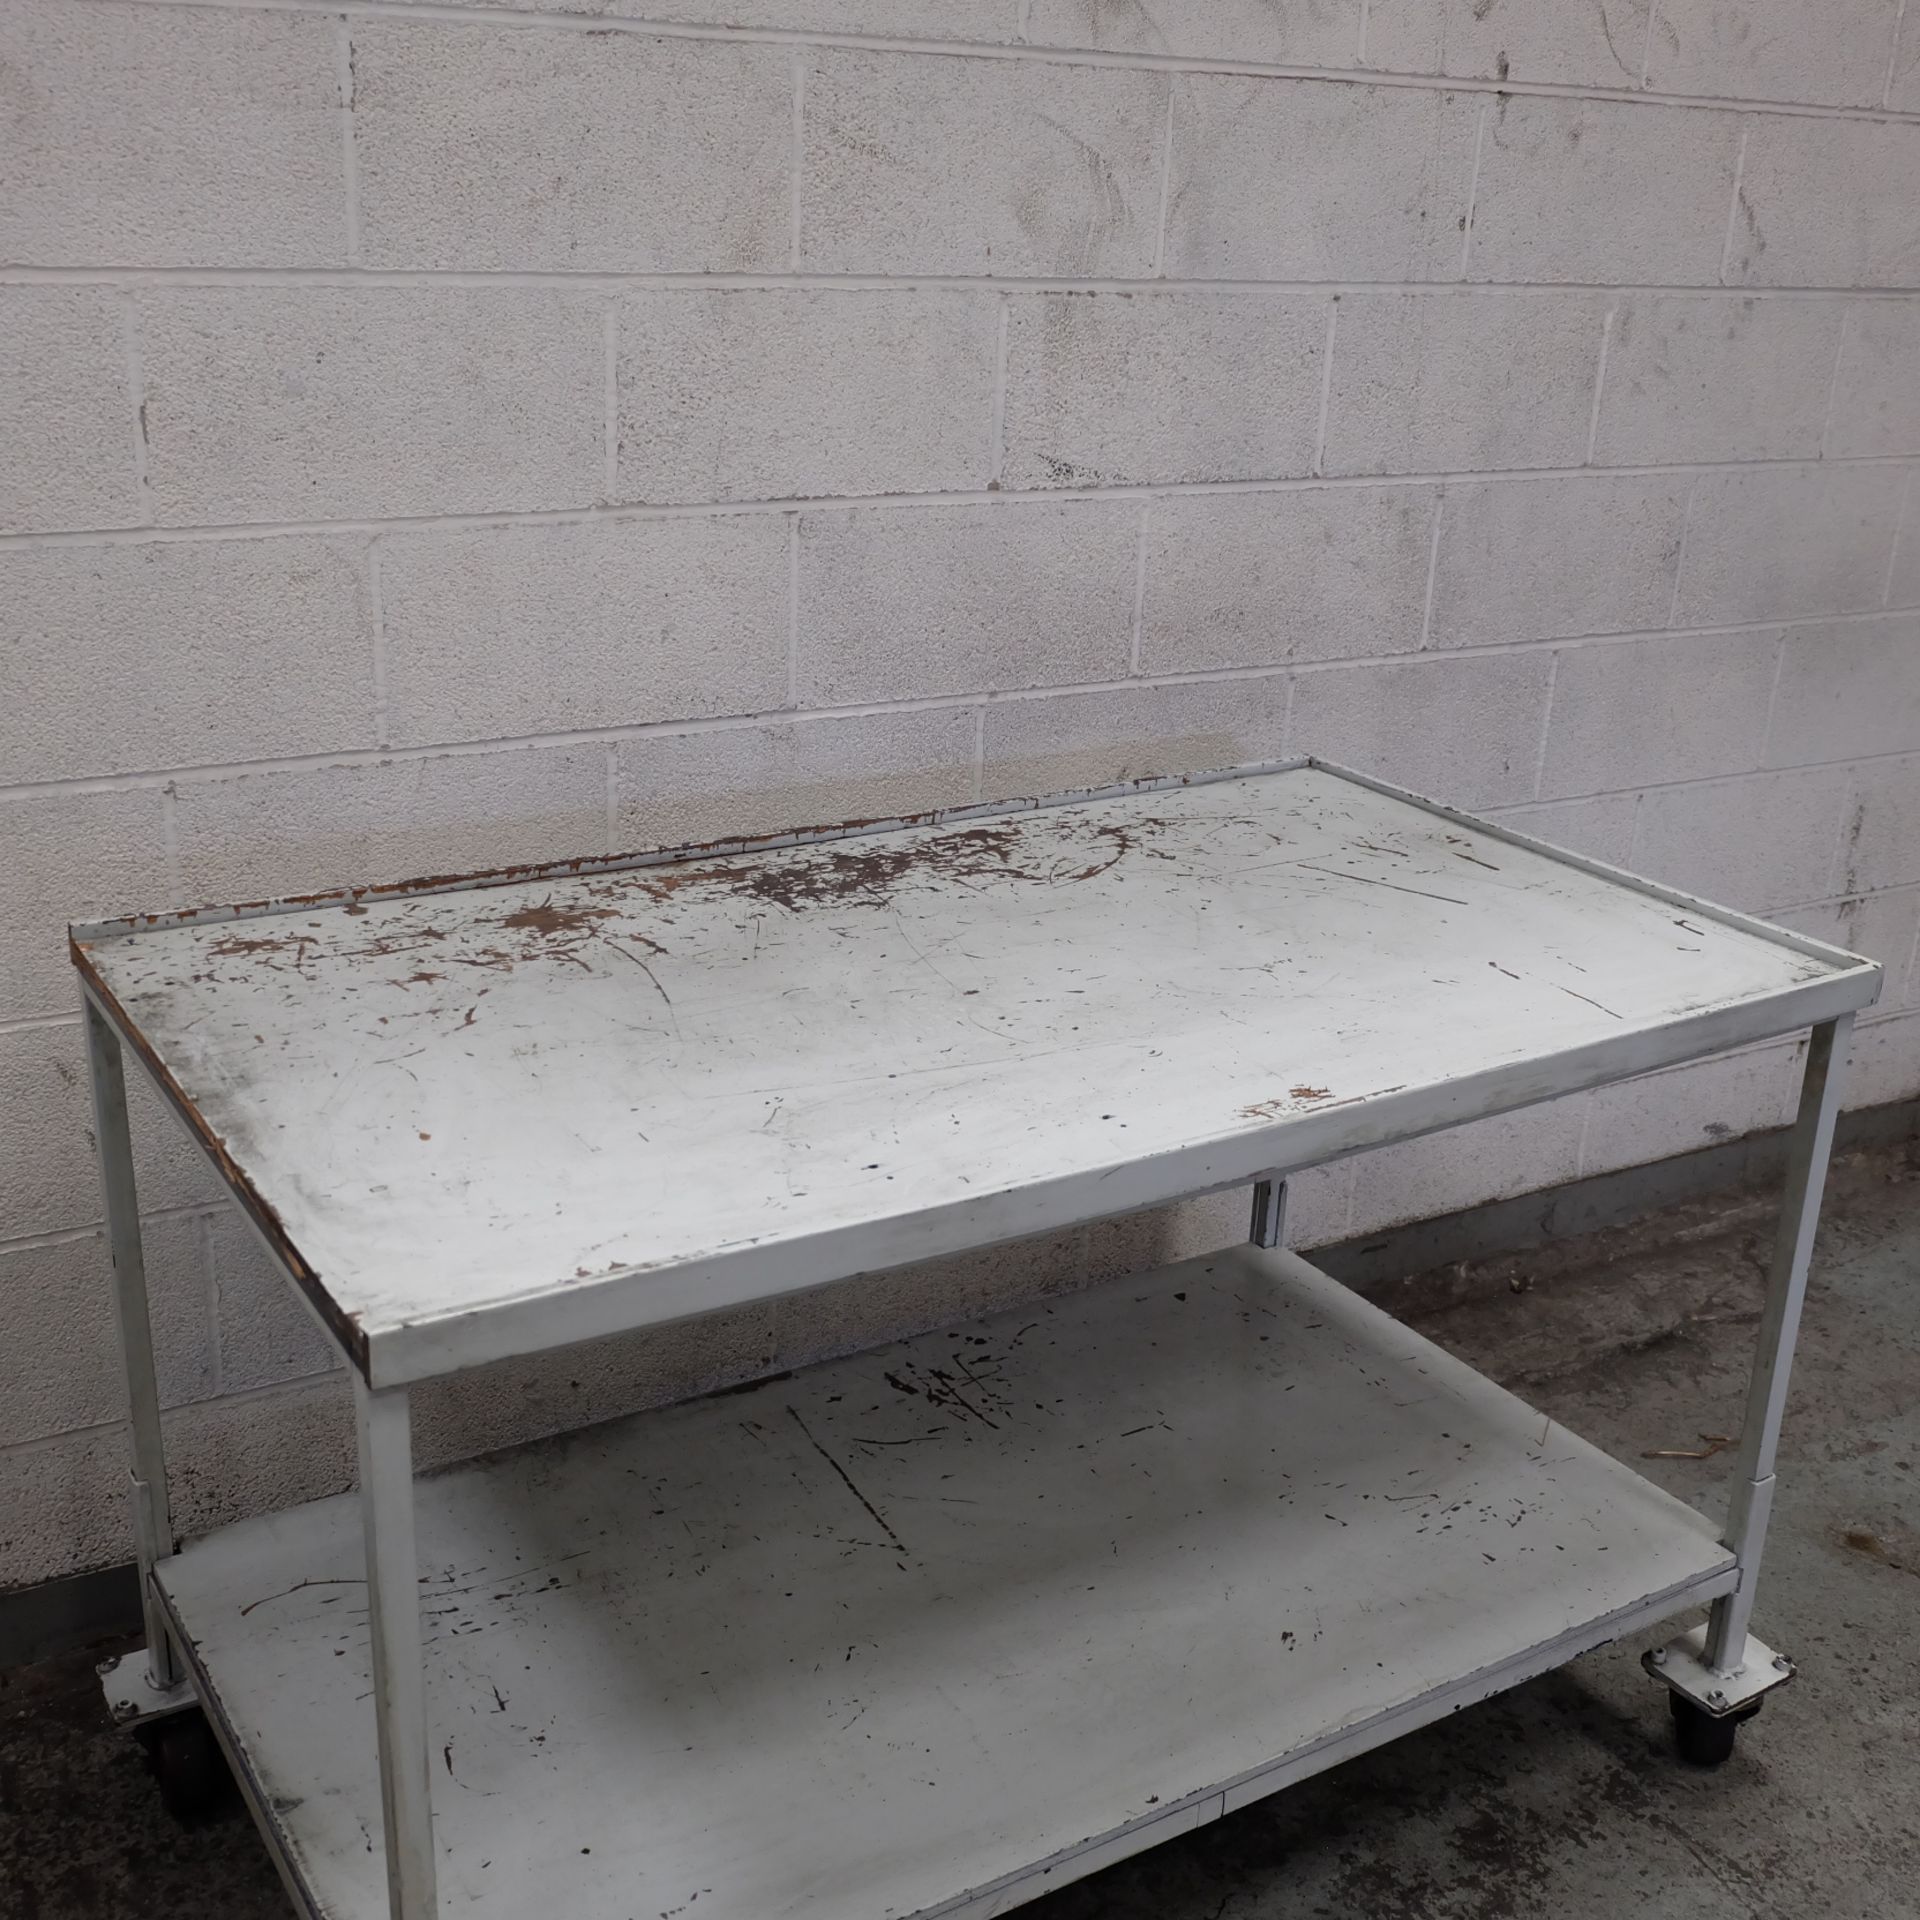 A Steel Framed Timber Top Mobile 2 tier Work Bench - Image 5 of 6